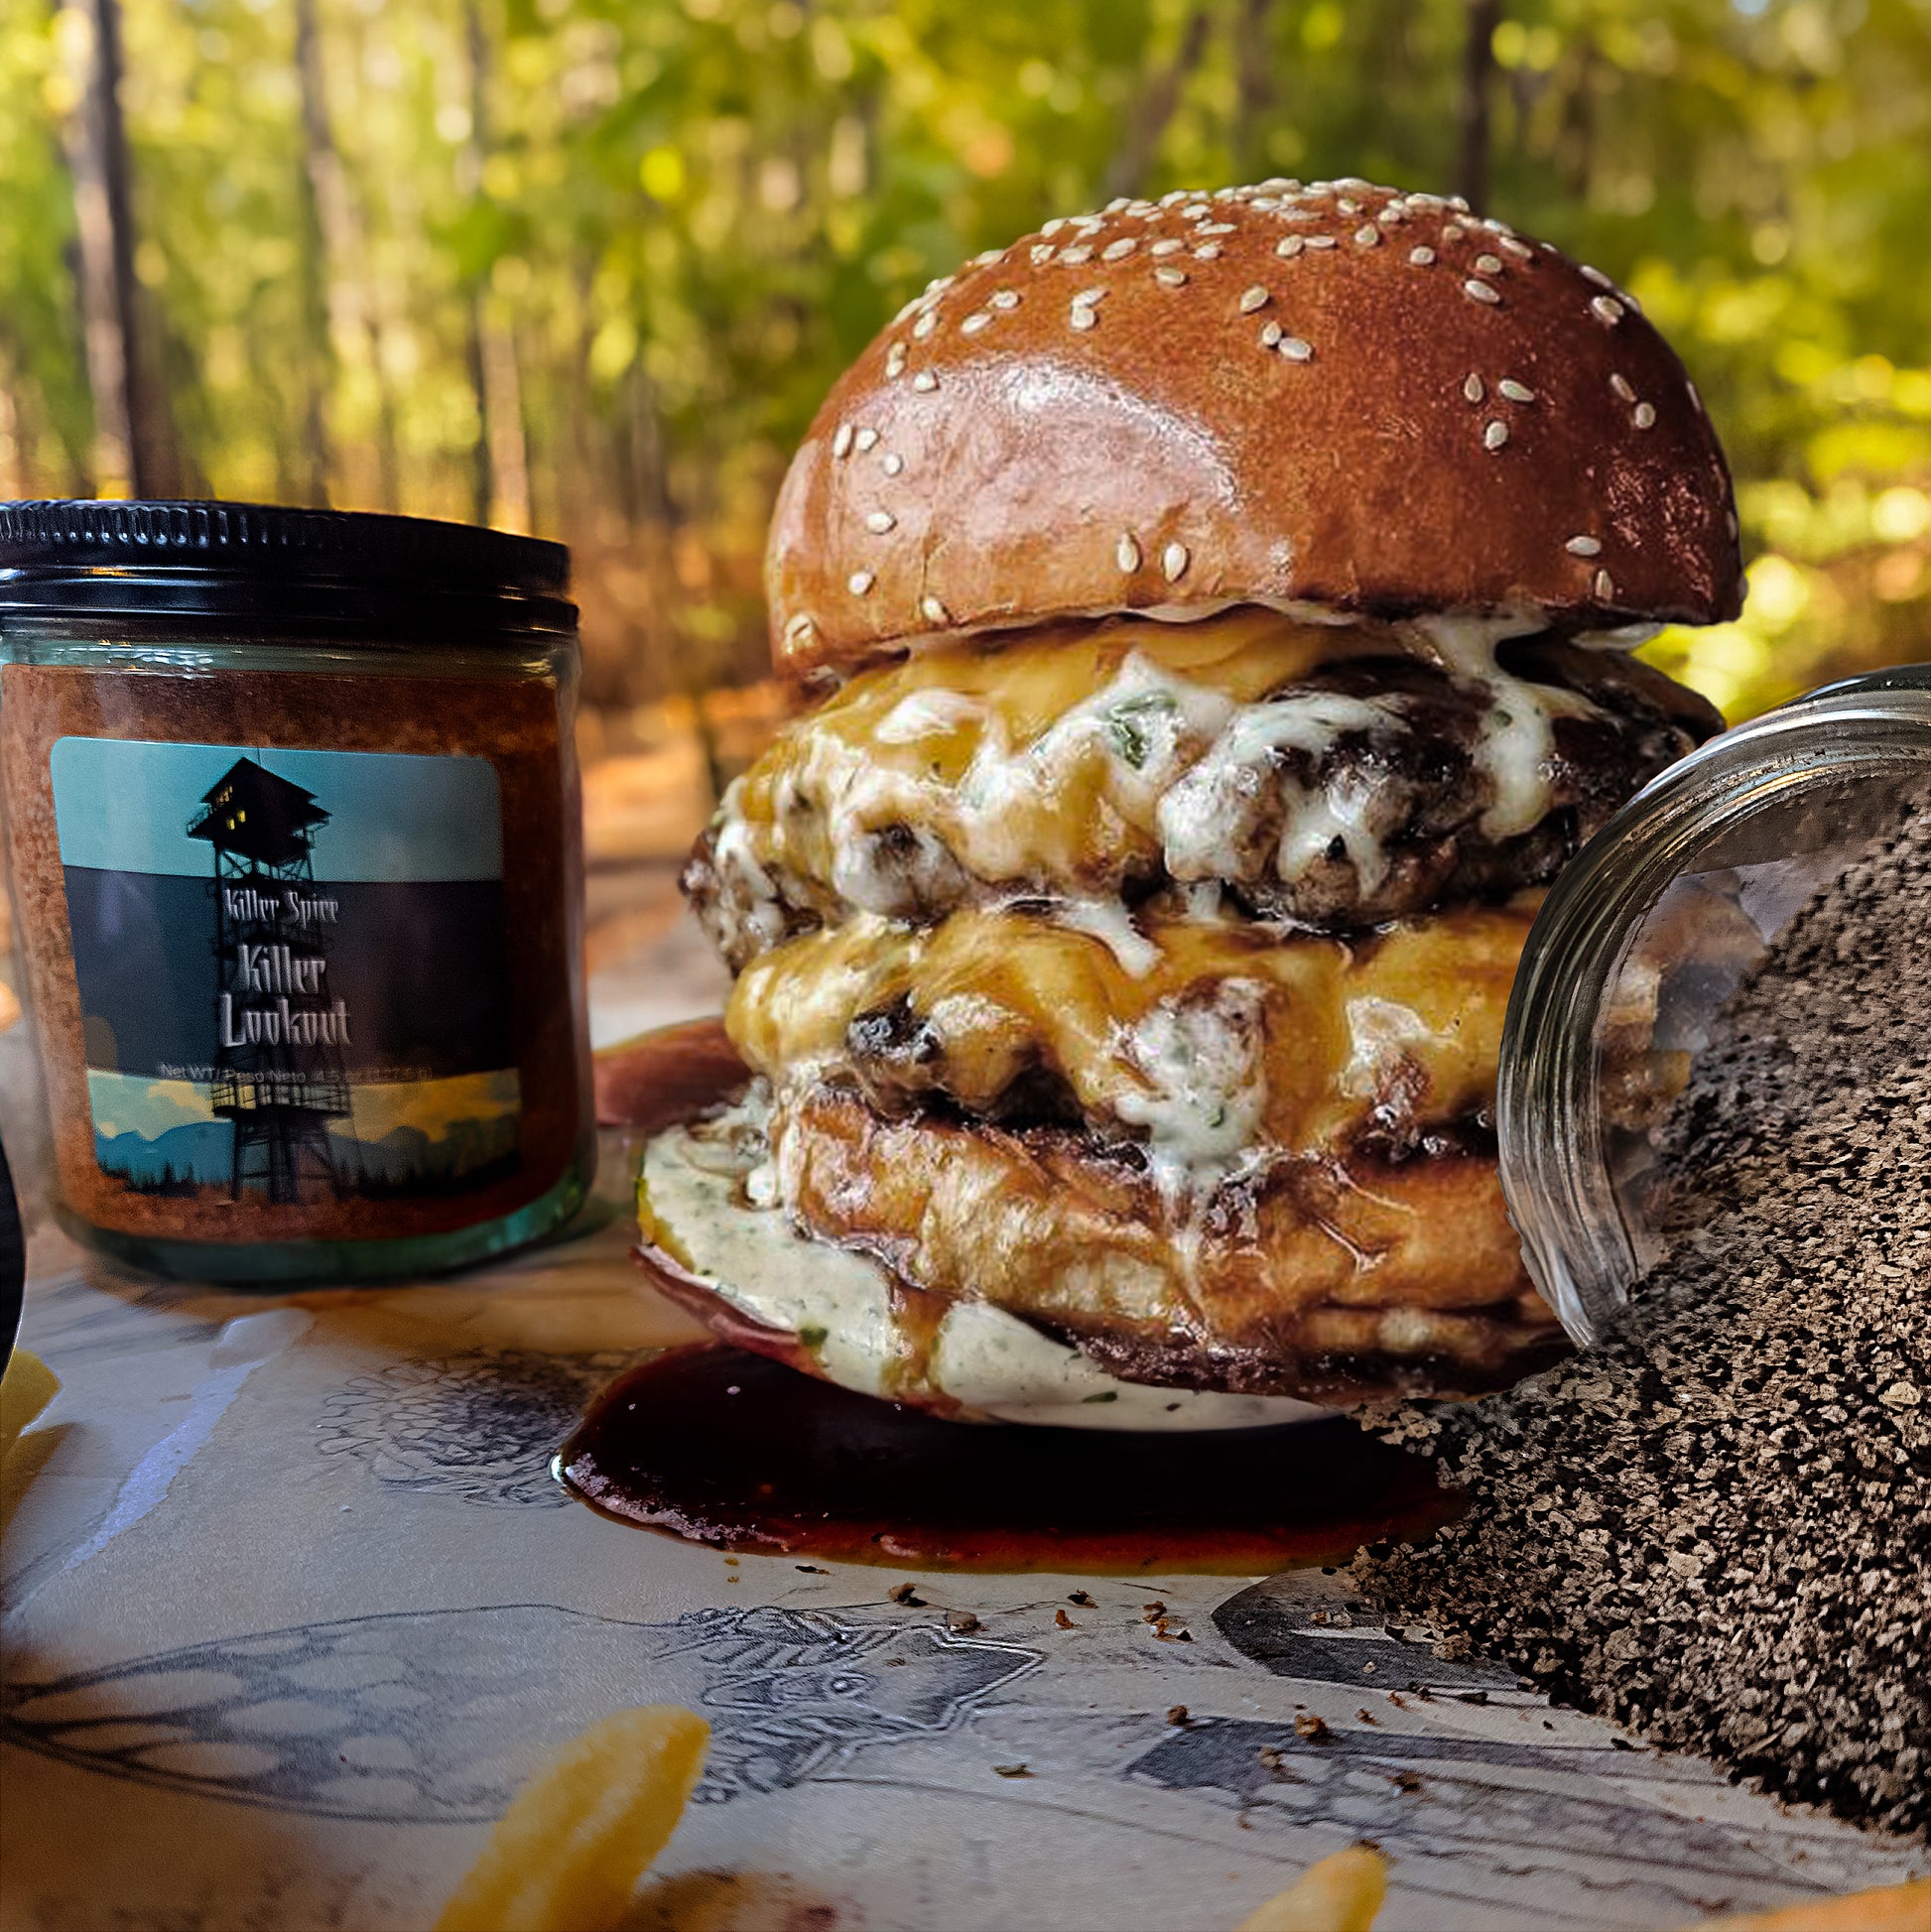 A double cheeseburger with a side of fries, paired with a jar of sauce and a spilled pile of Killer Lookout (Cajun Spice) on a wooden surface, with a blurred forest backdrop.